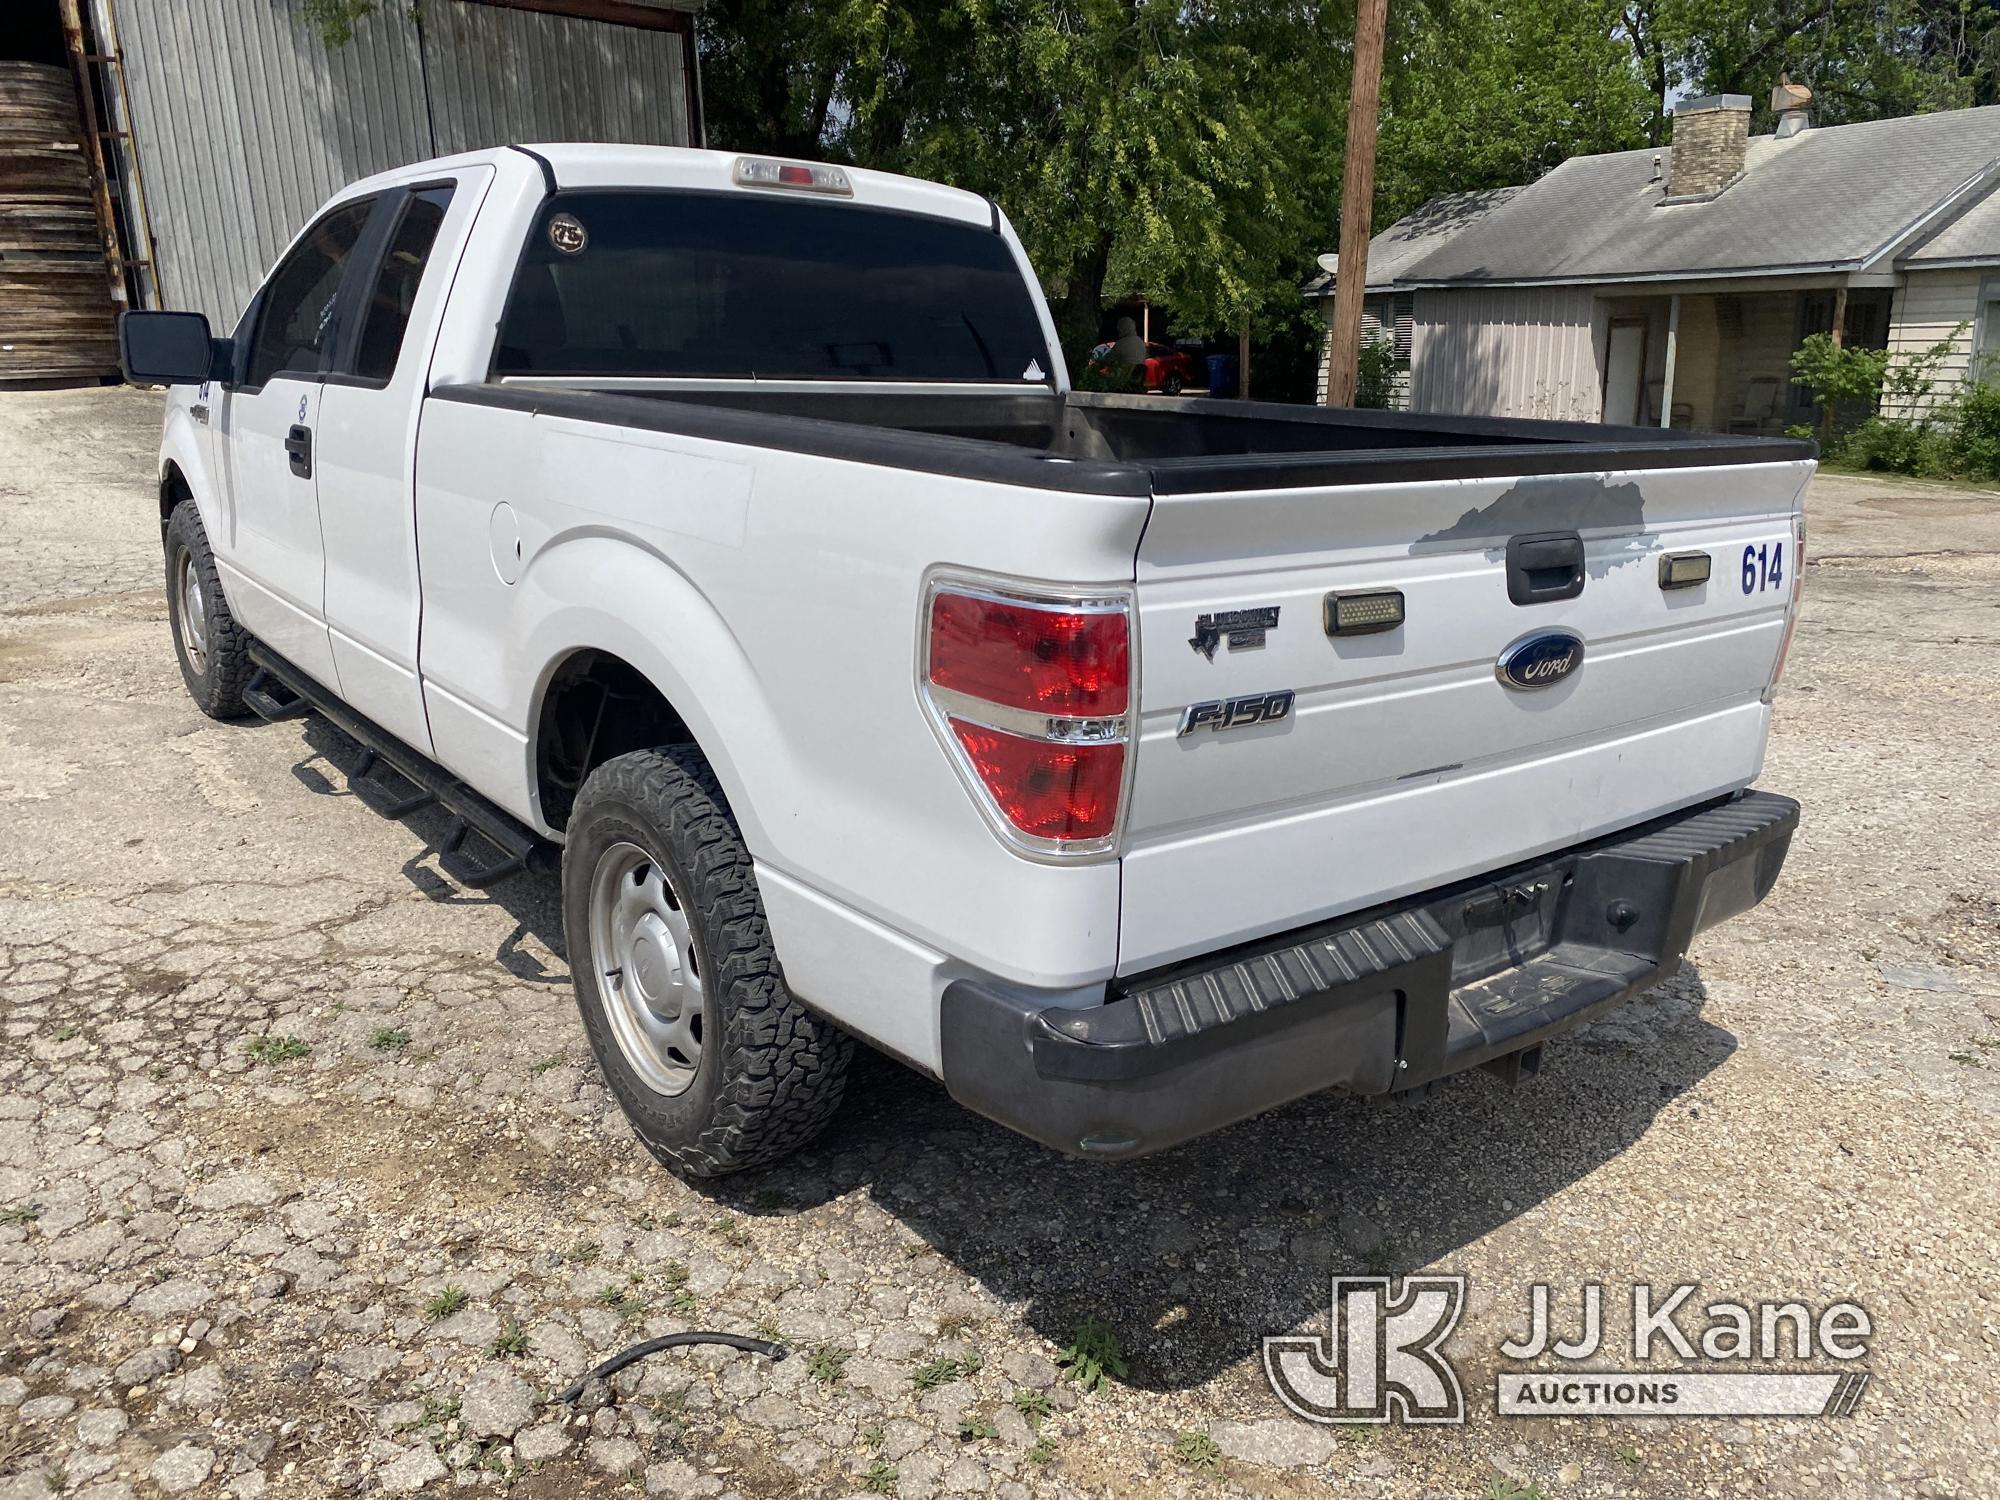 (San Antonio, TX) 2010 Ford F150 Extended-Cab Pickup Truck Runs & Moves